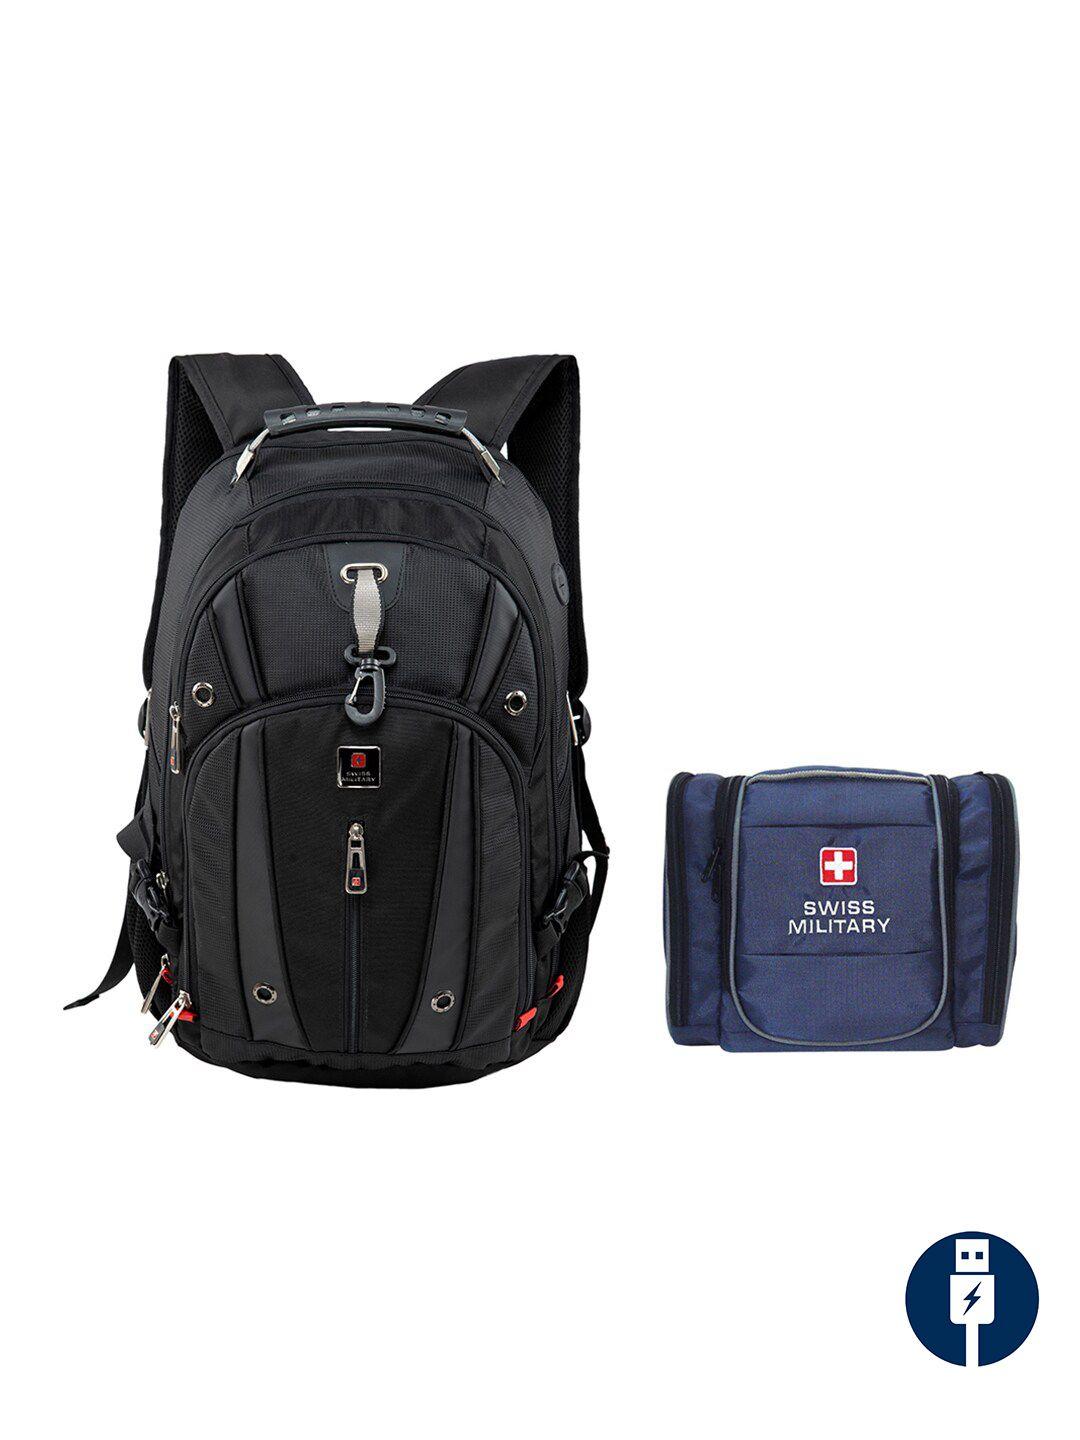 swiss military unisex black & blue brand logo backpack with blue toiletry bag